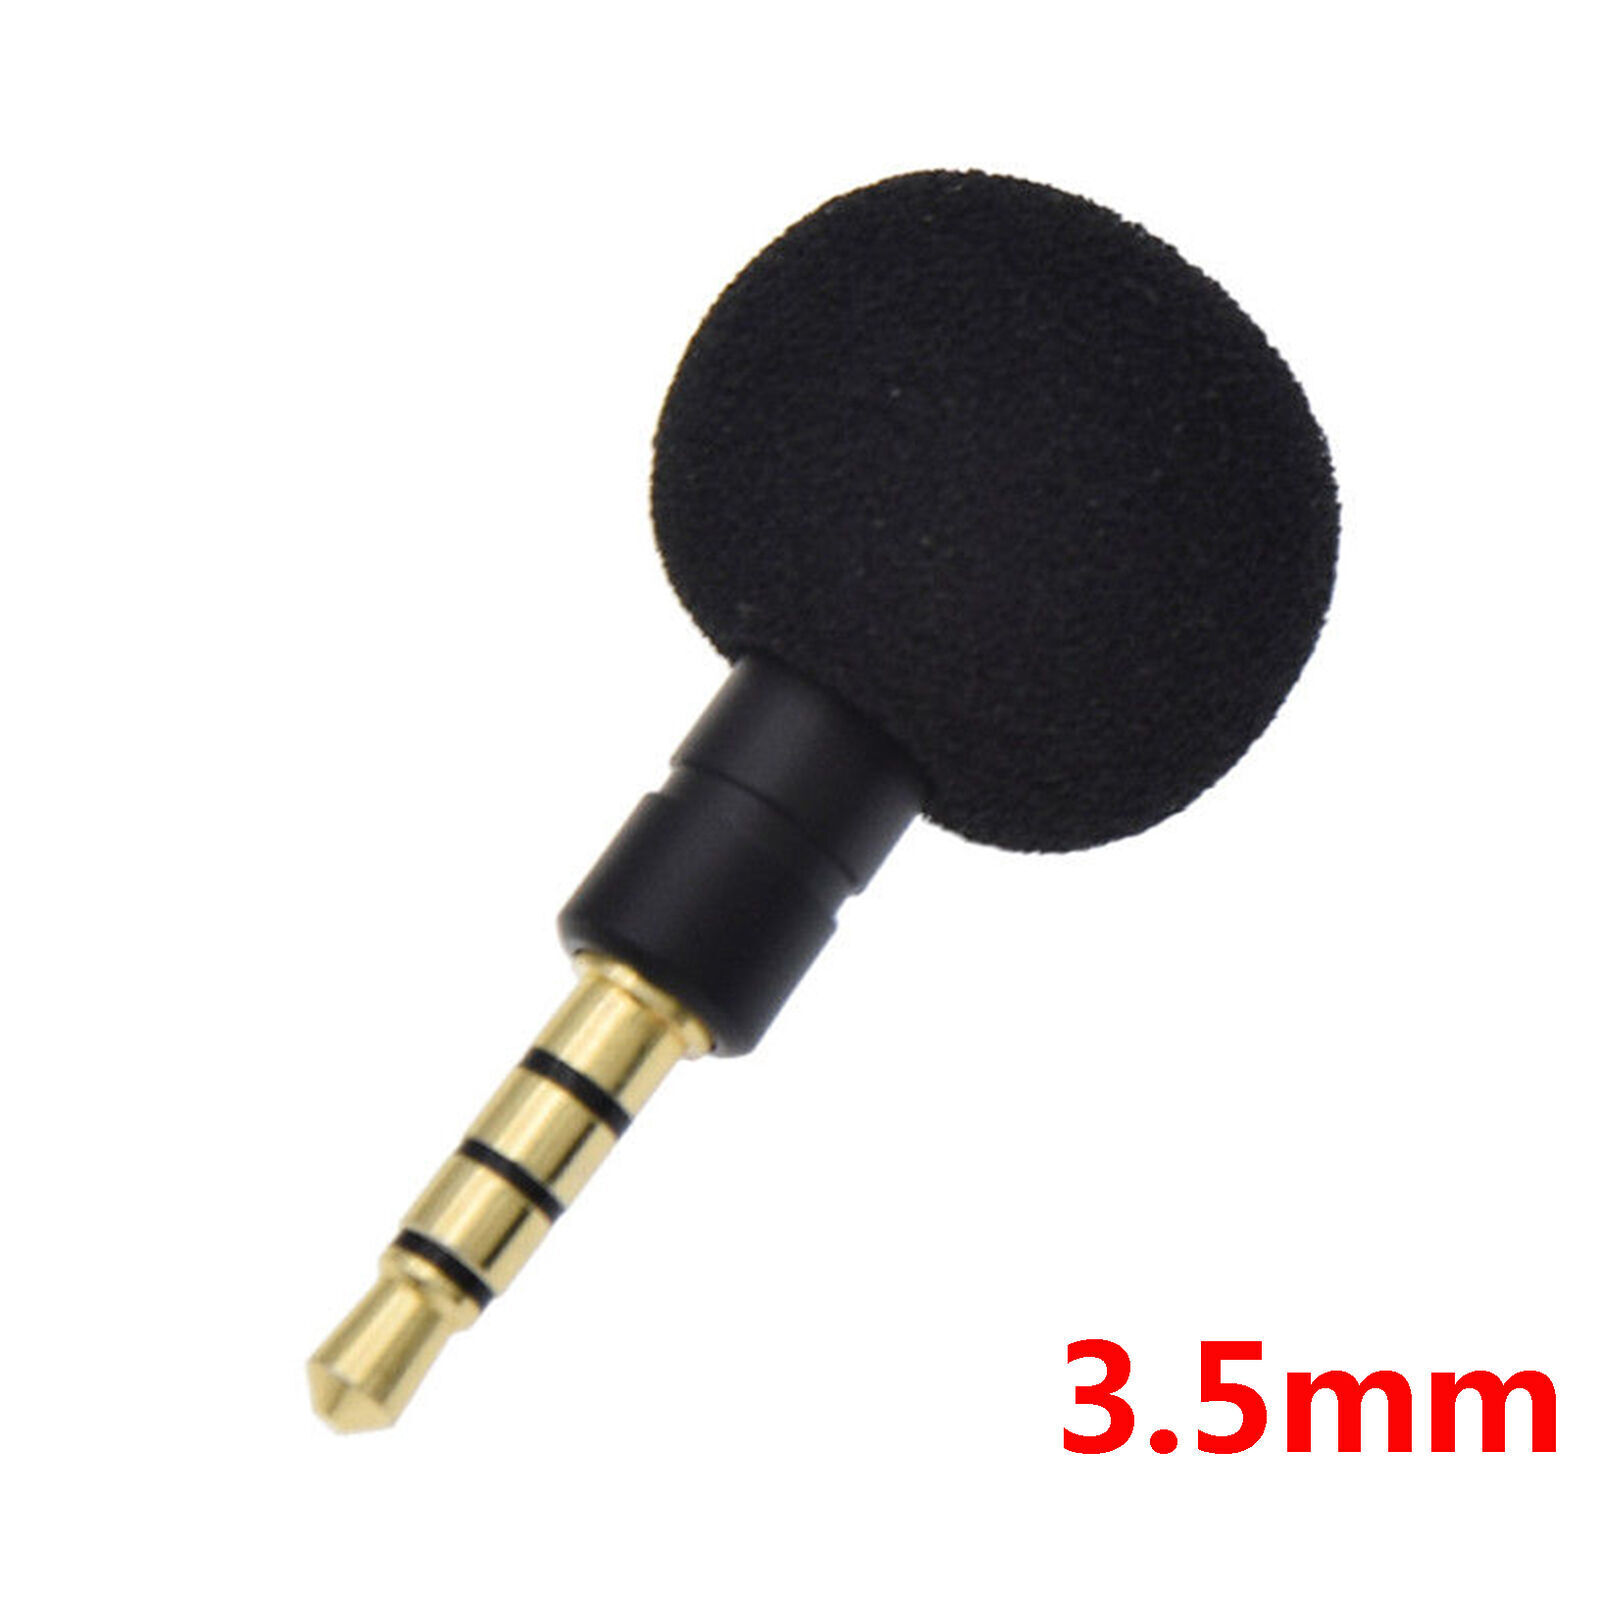 Mini 3.5mm Jack Voice Mic Microphone For Recorder Smart Phone Cell Phone USA